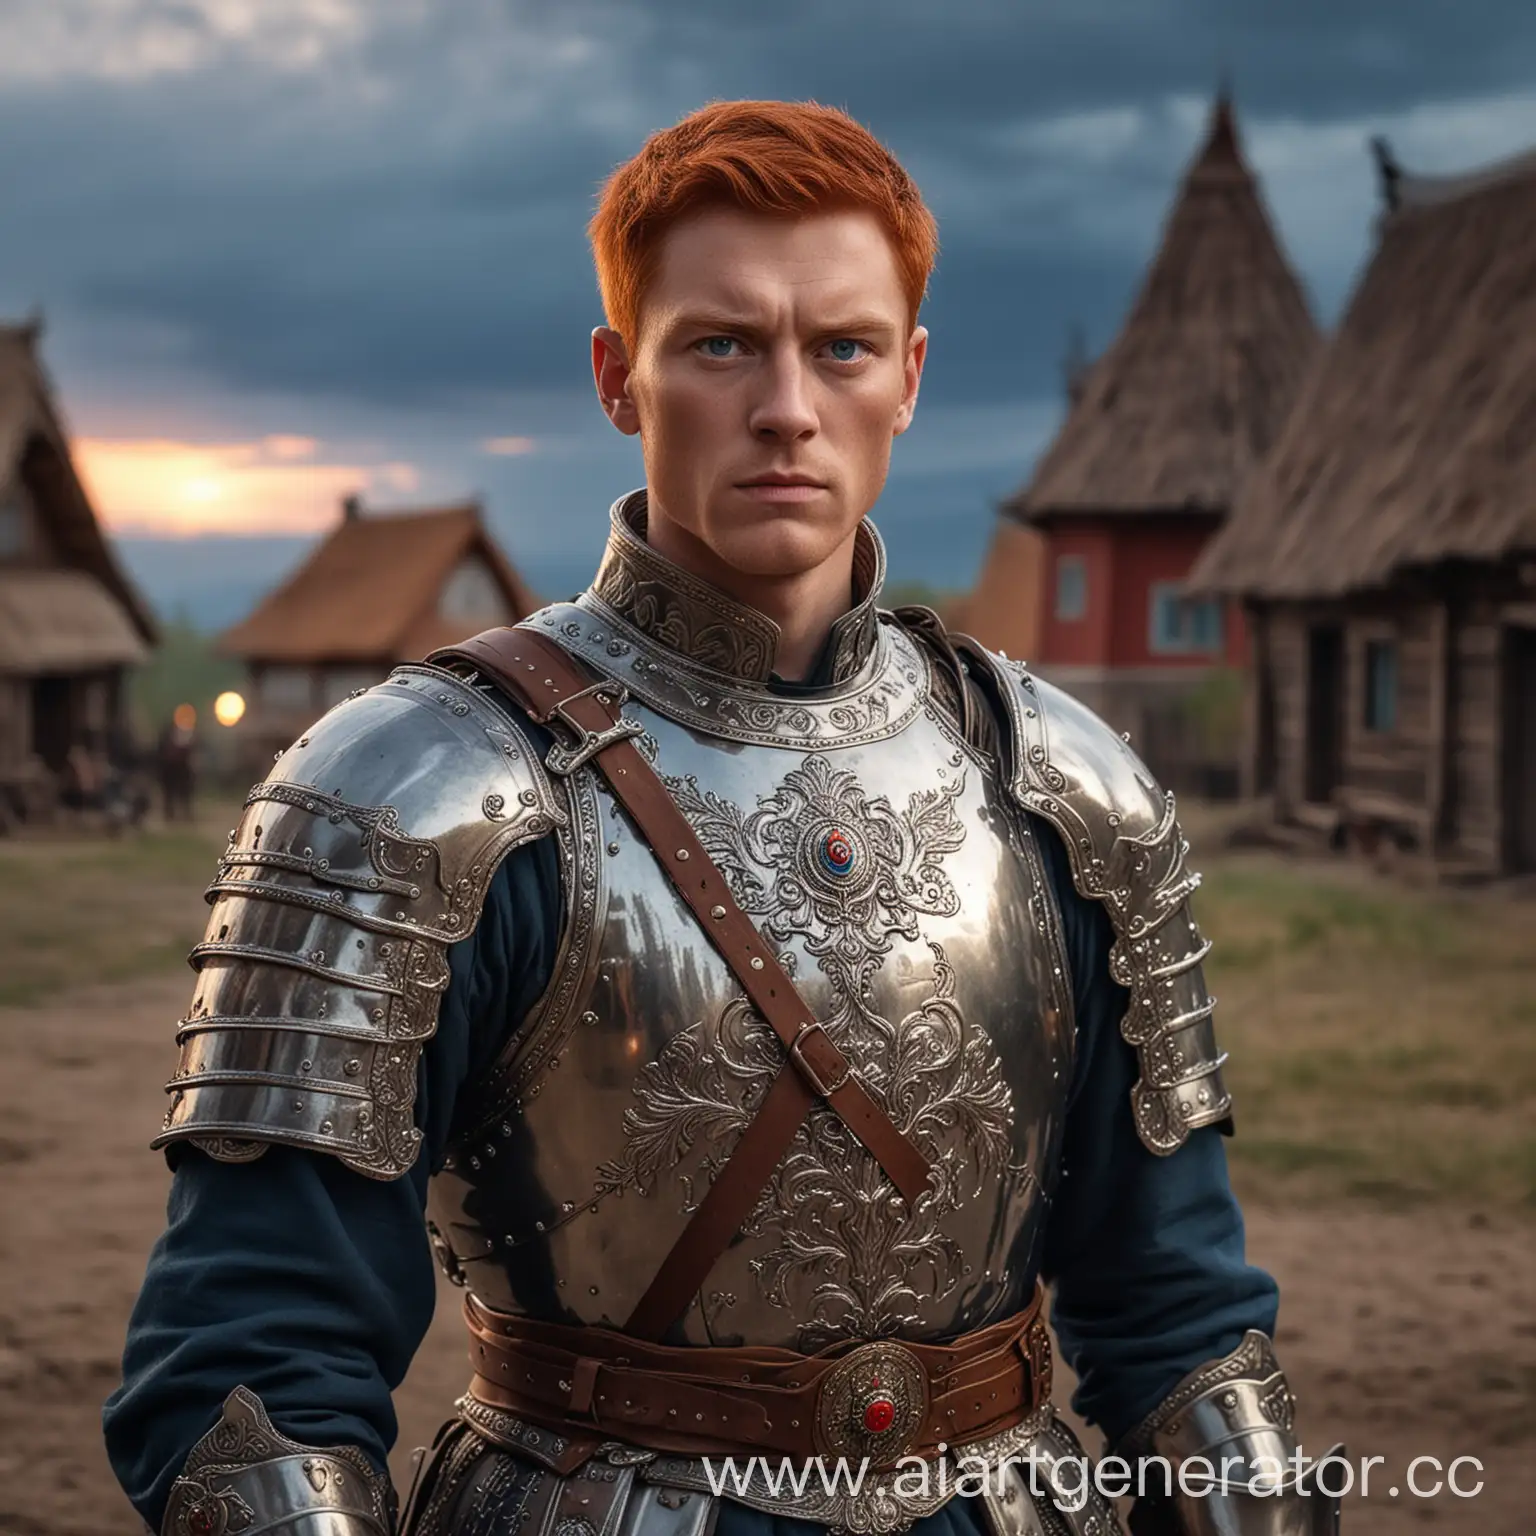 Portrait of a noble nobleman in armor, red-haired, with short hair, no beard and blue eyes, standing against the backdrop of a Russian village with a sword in his hand in the middle of the evening